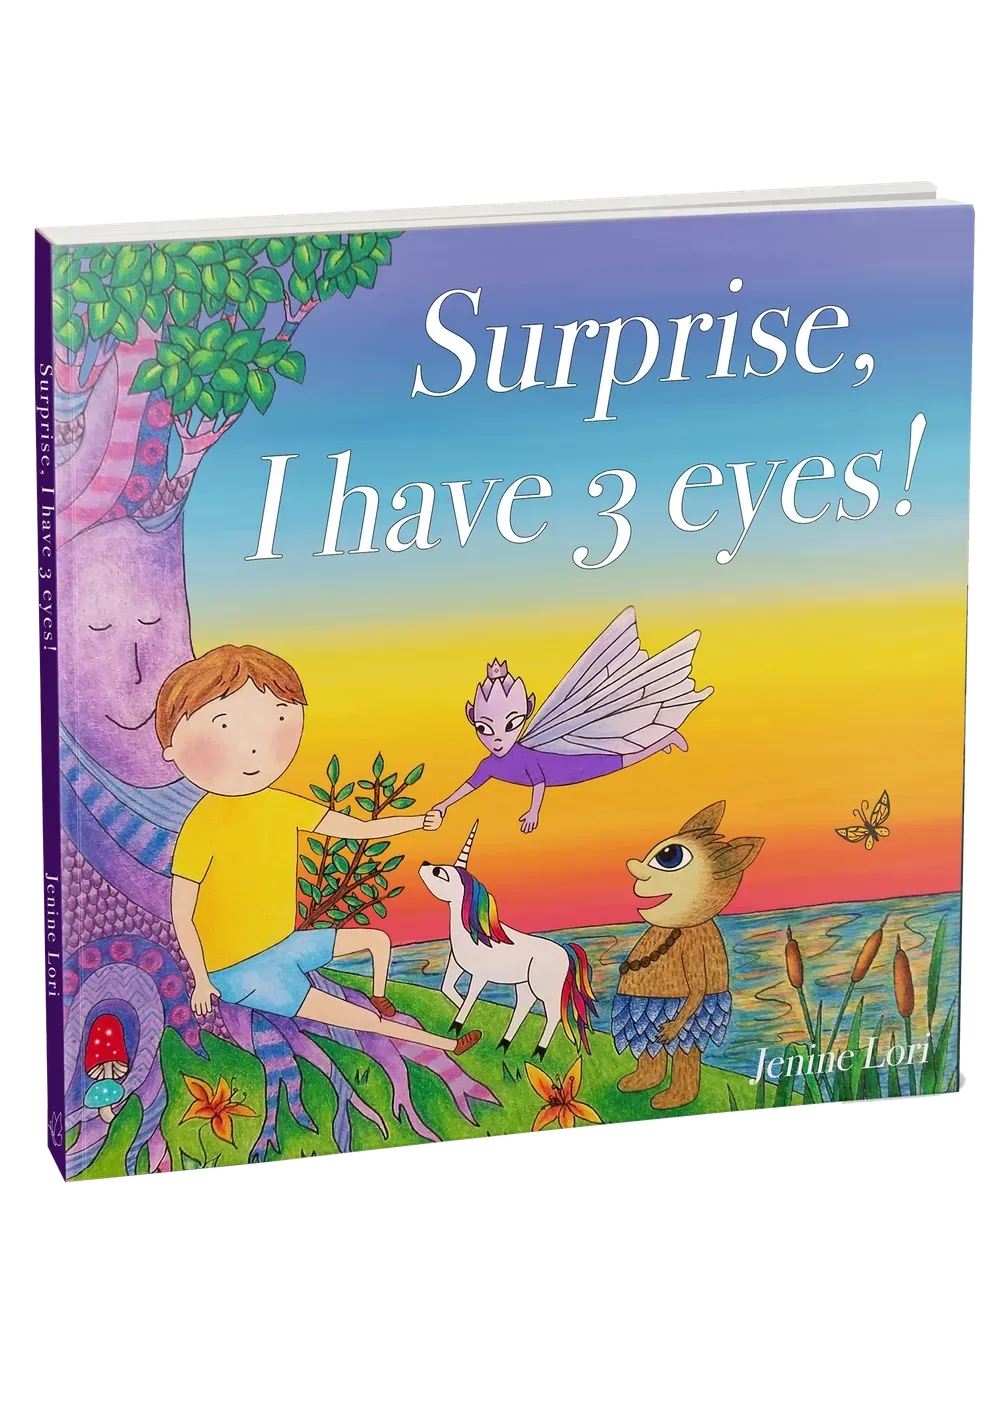 Book cover of Surprise, I have e eyes